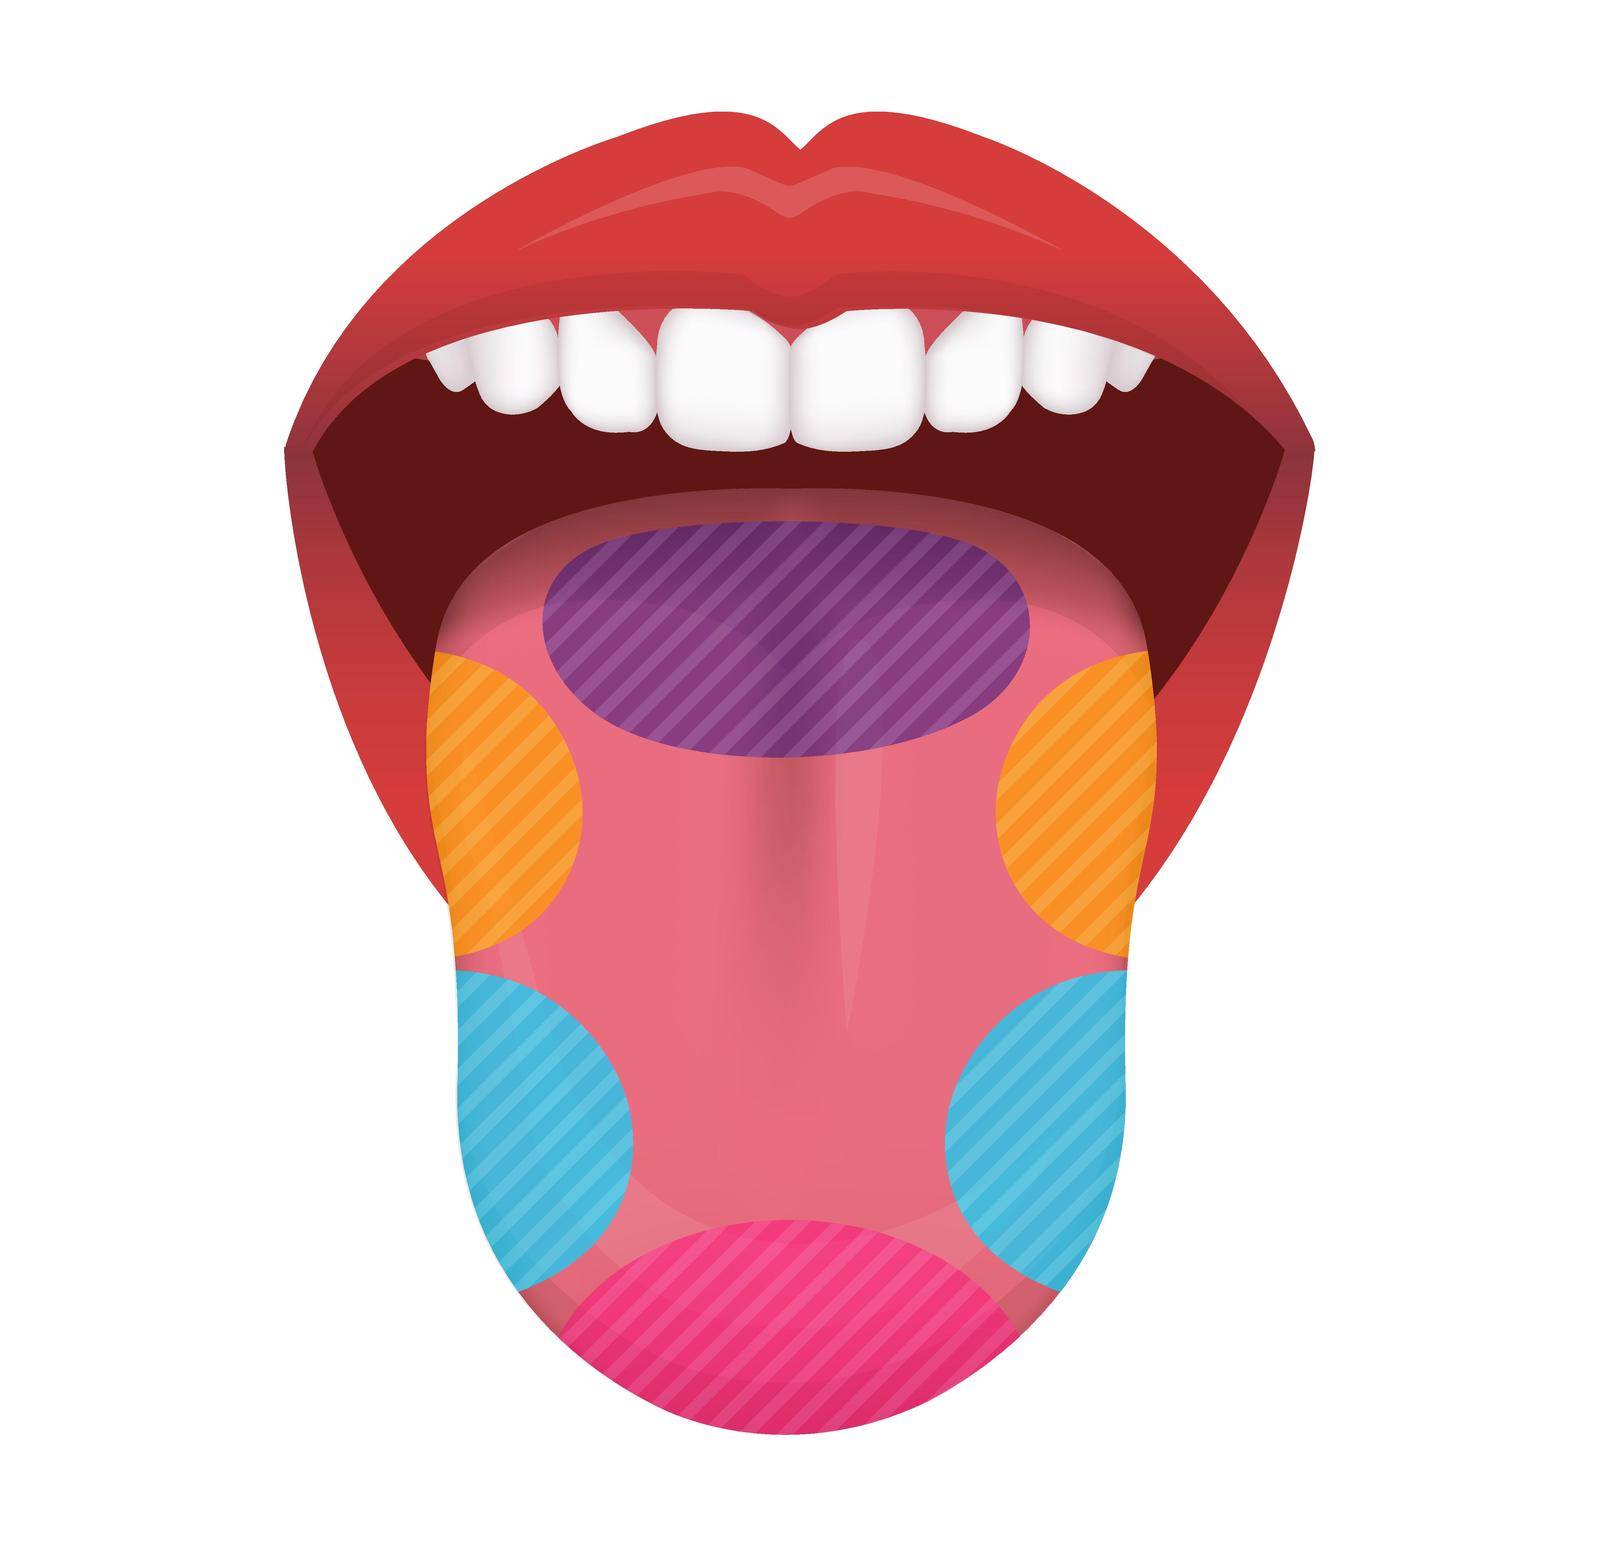 Taste areas of human tongue vector illustration by barks